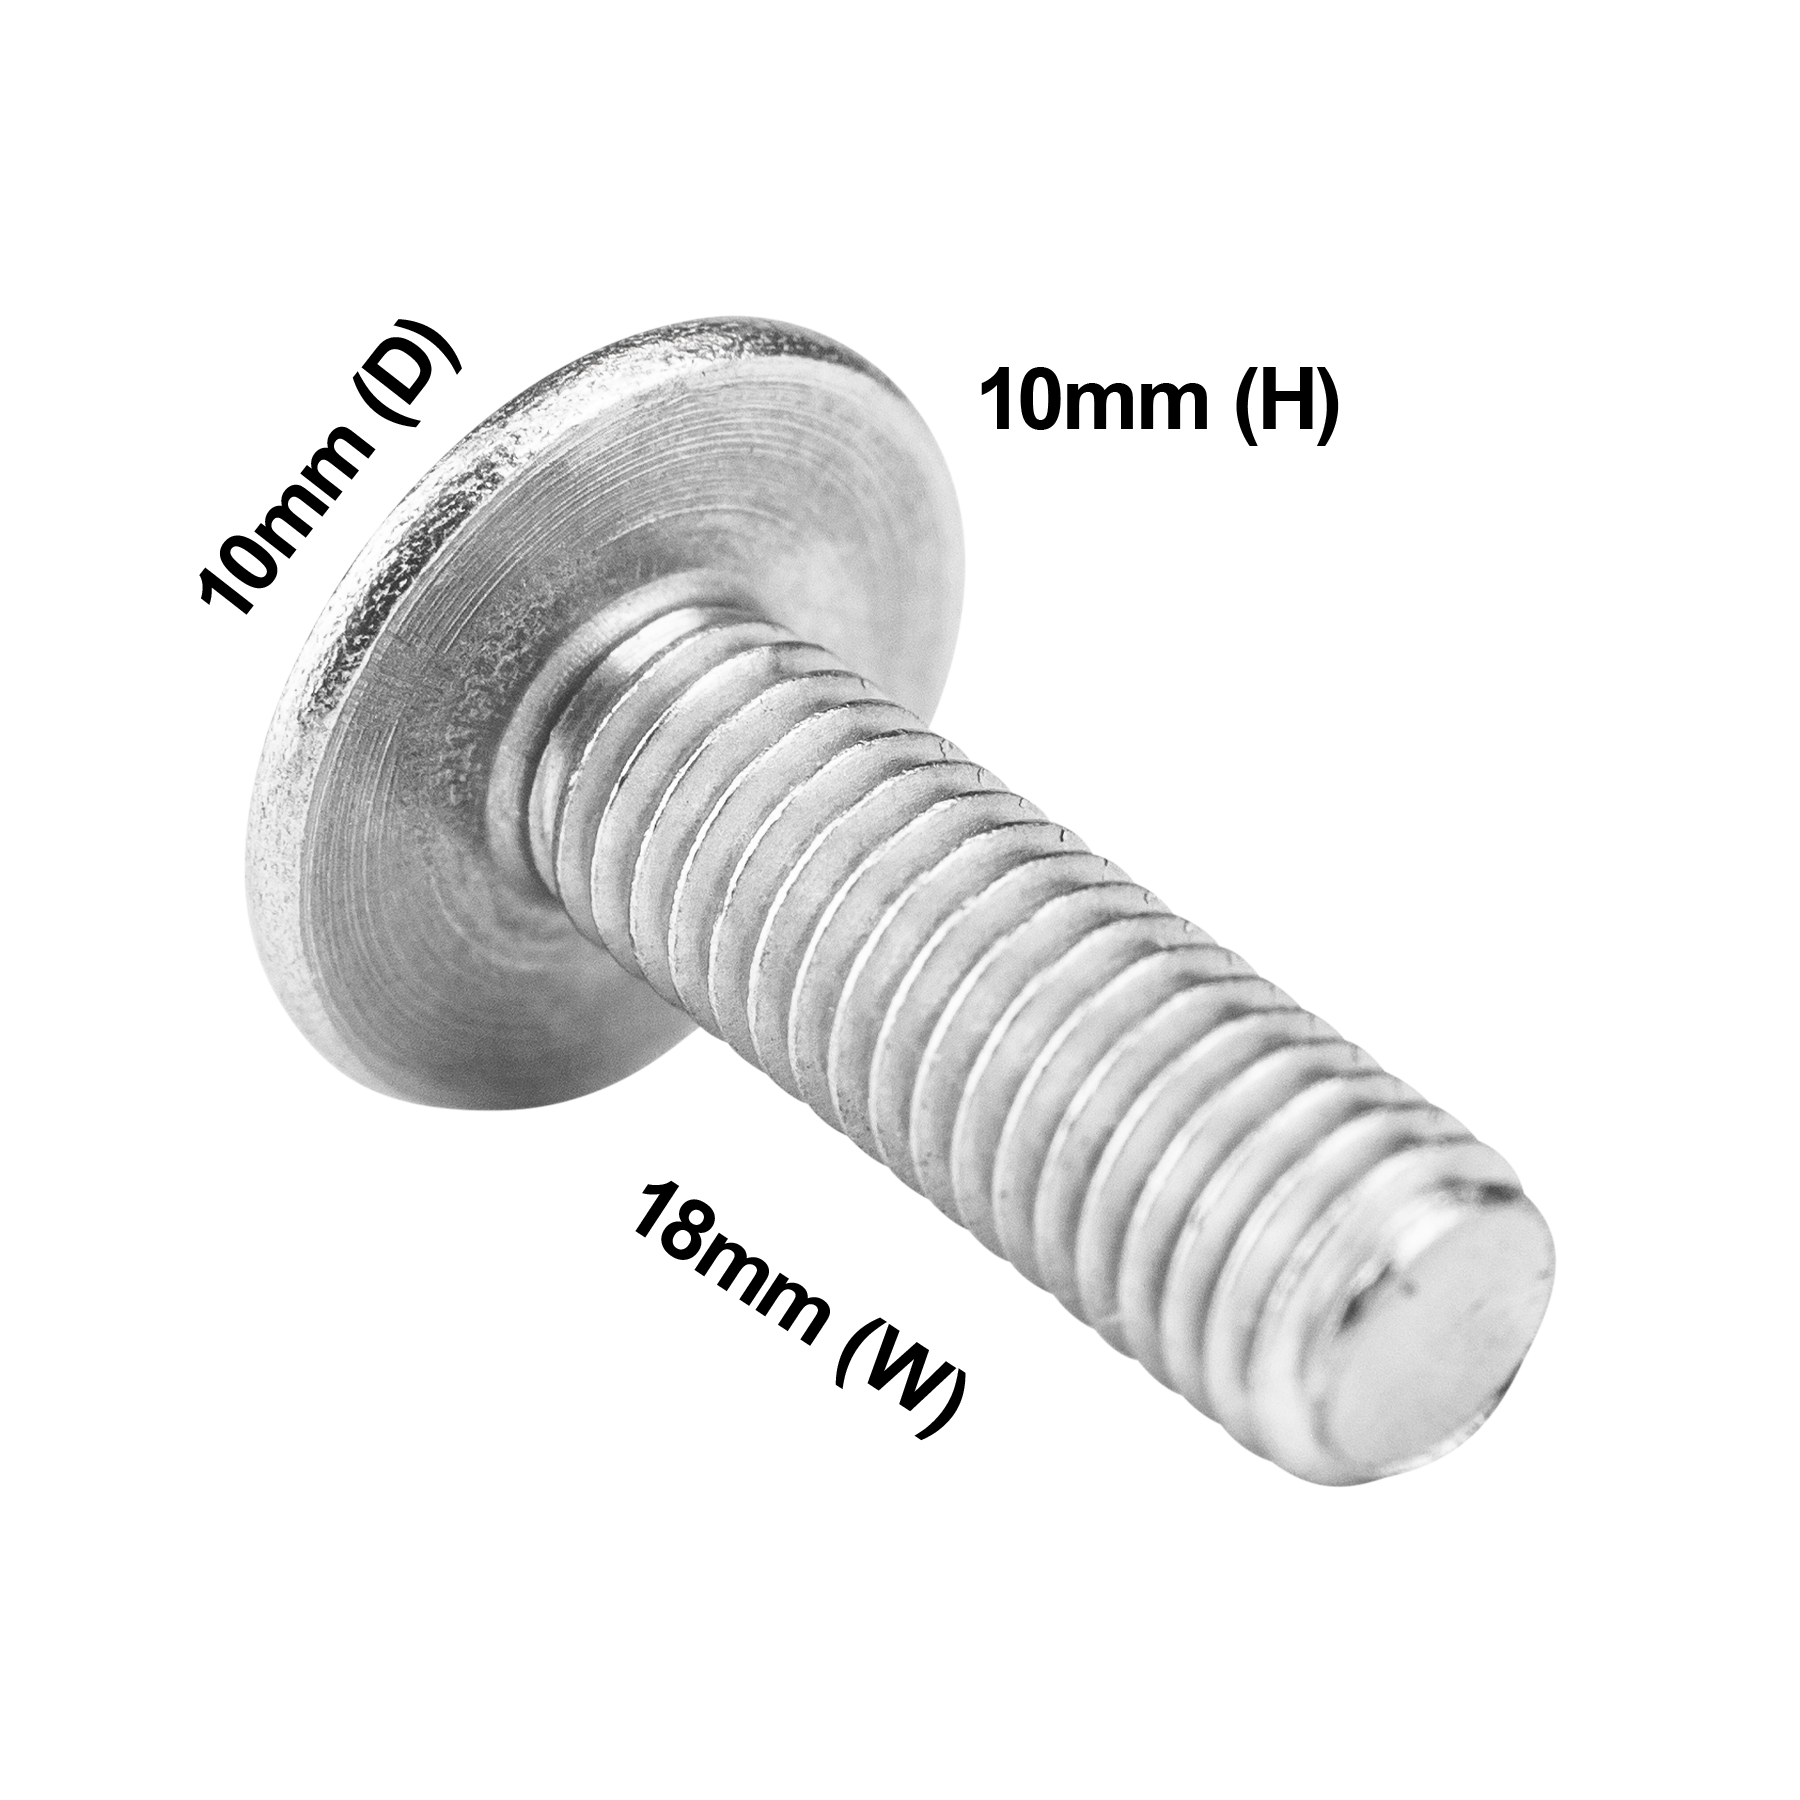 /globalassets/images/accessory-images/sku0750001027-screw-m5-x-16mm-ss-front.png